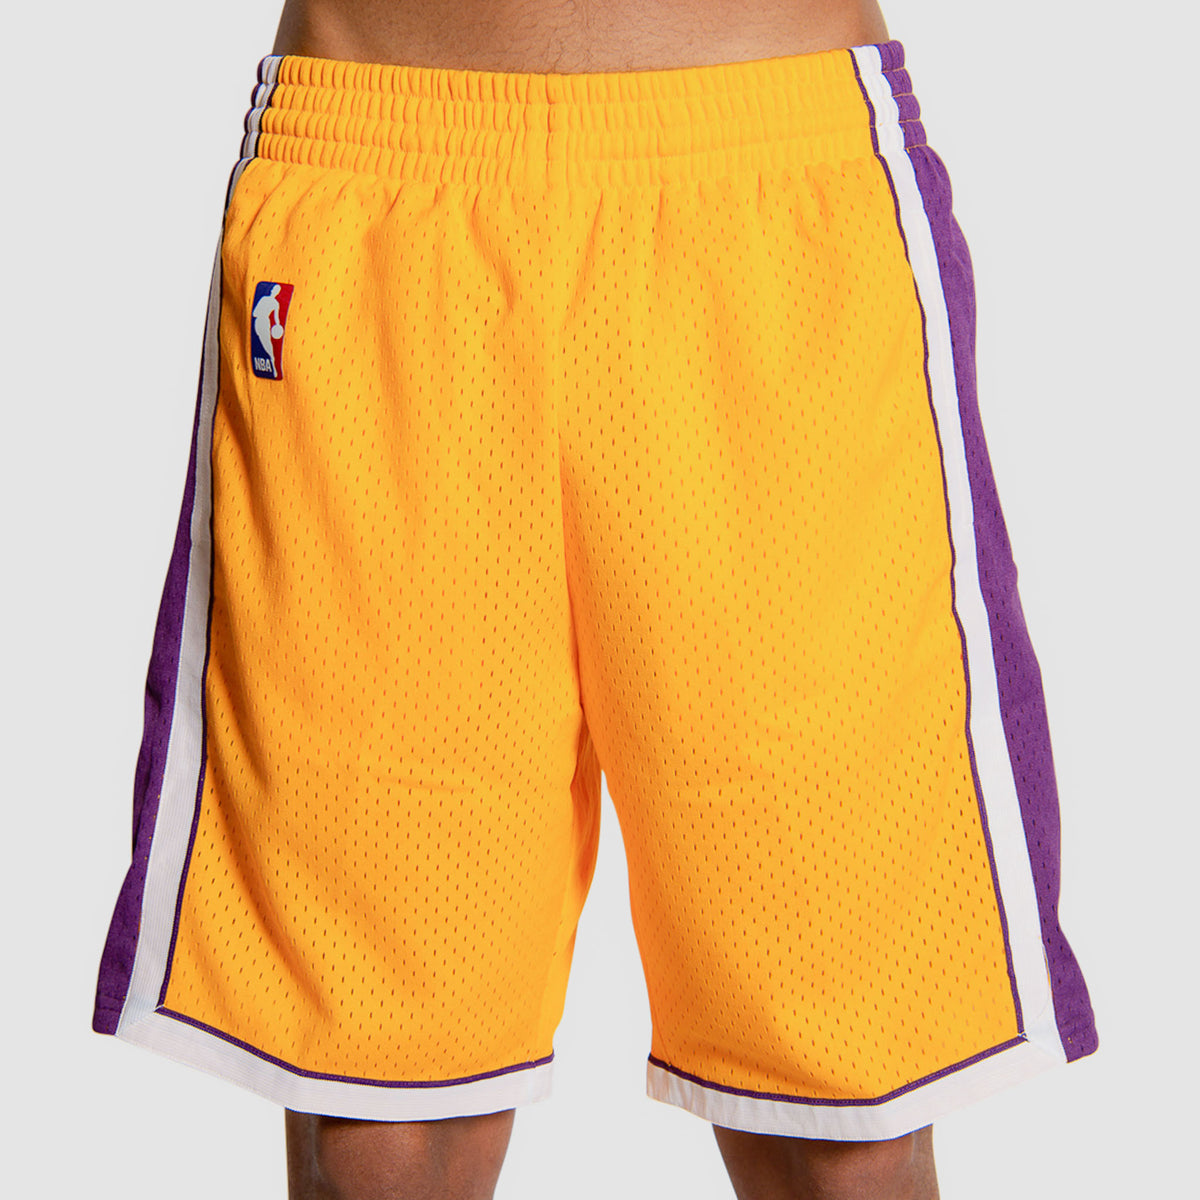 old lakers shorts